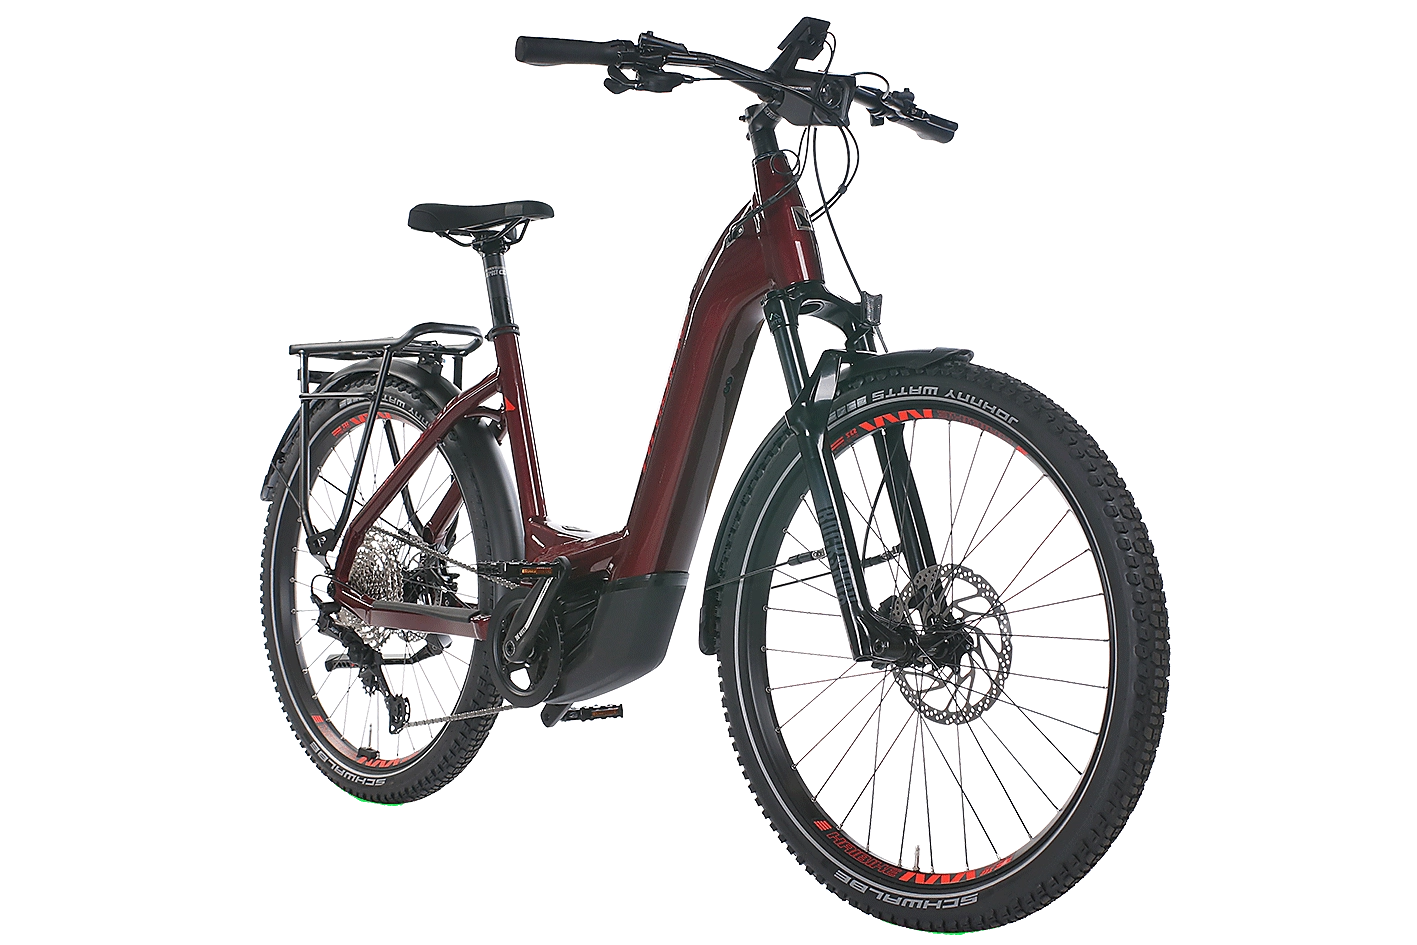 HAIBIKE_TREKKING_11_750_WH_WAVE_TUSCAN_NEON_RED_GLOSS_45572330_45572340_45572350.PNG